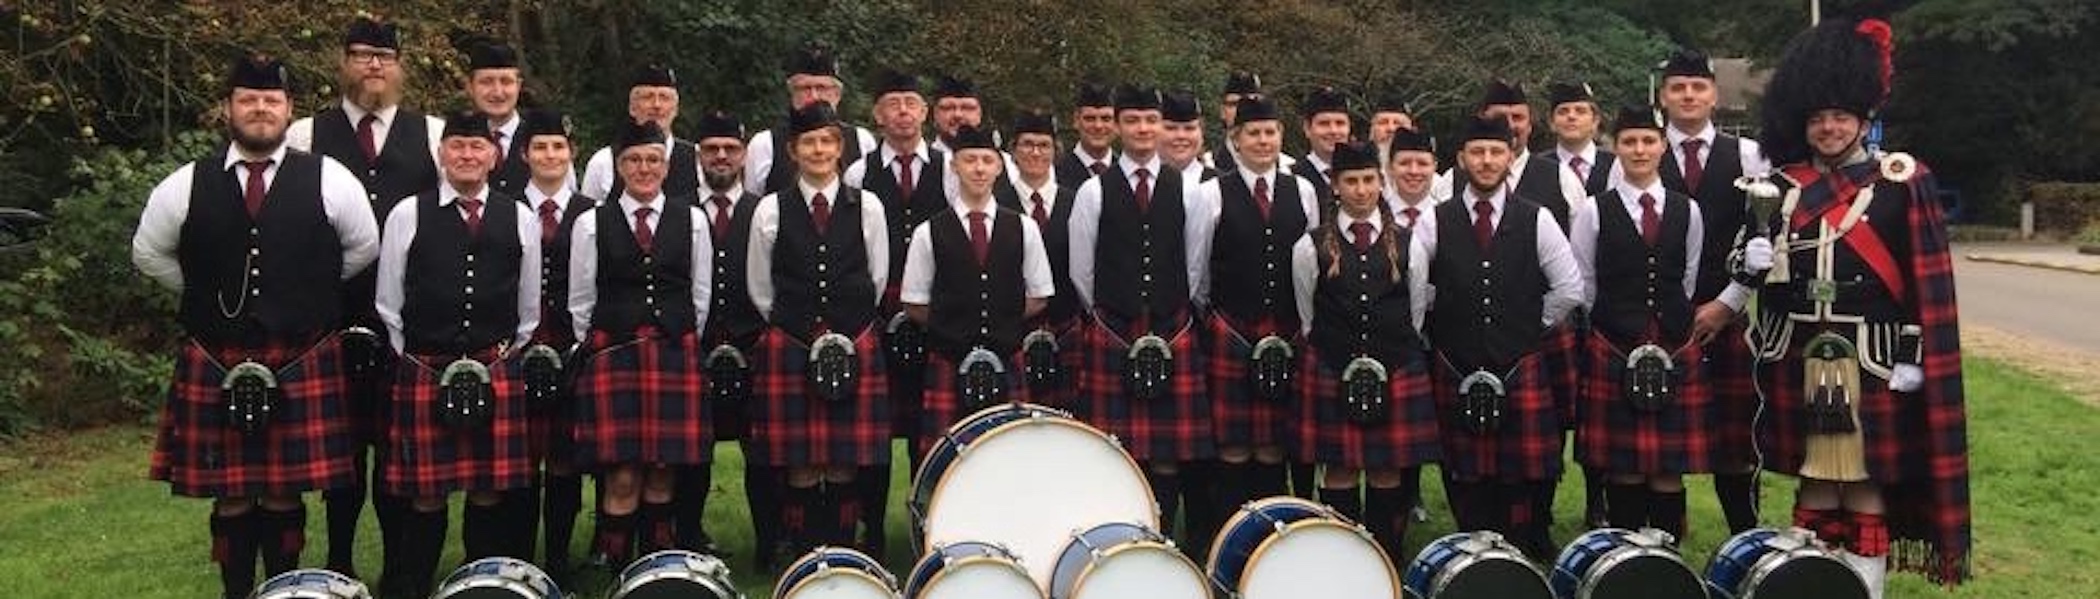 Nutscheid Forest Pipe Band e.V